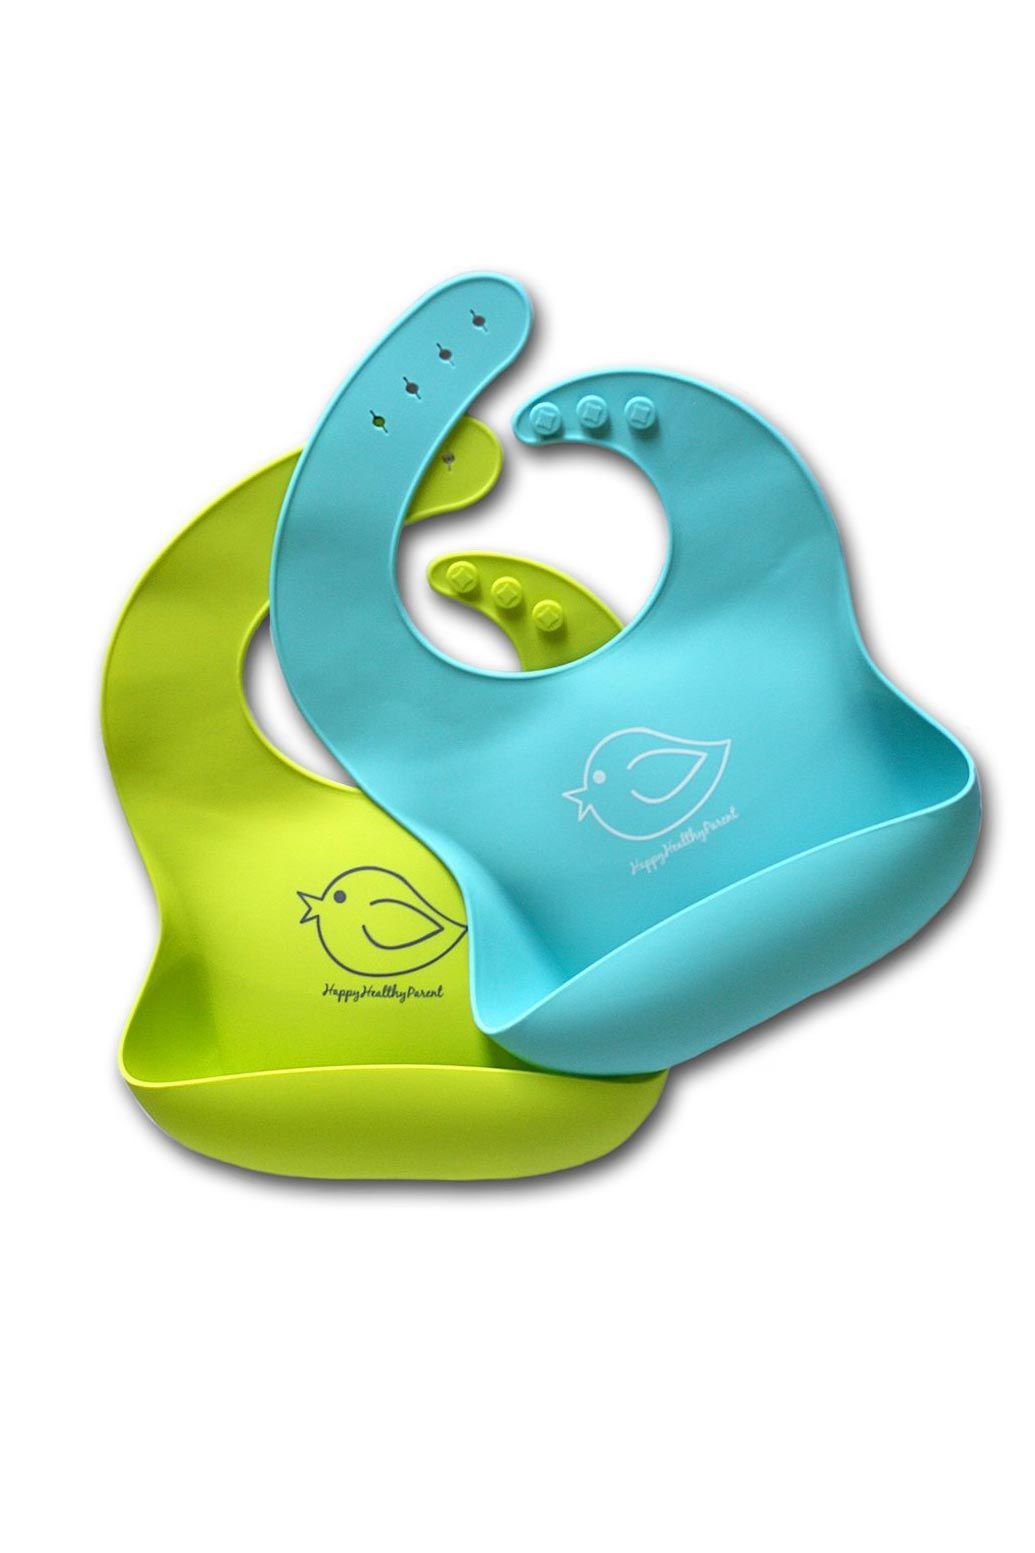 Bobo Baby Bibs Adjustable Wide Size 6-24 Months Stretchy Quick-dry Material for Boys and Girls 